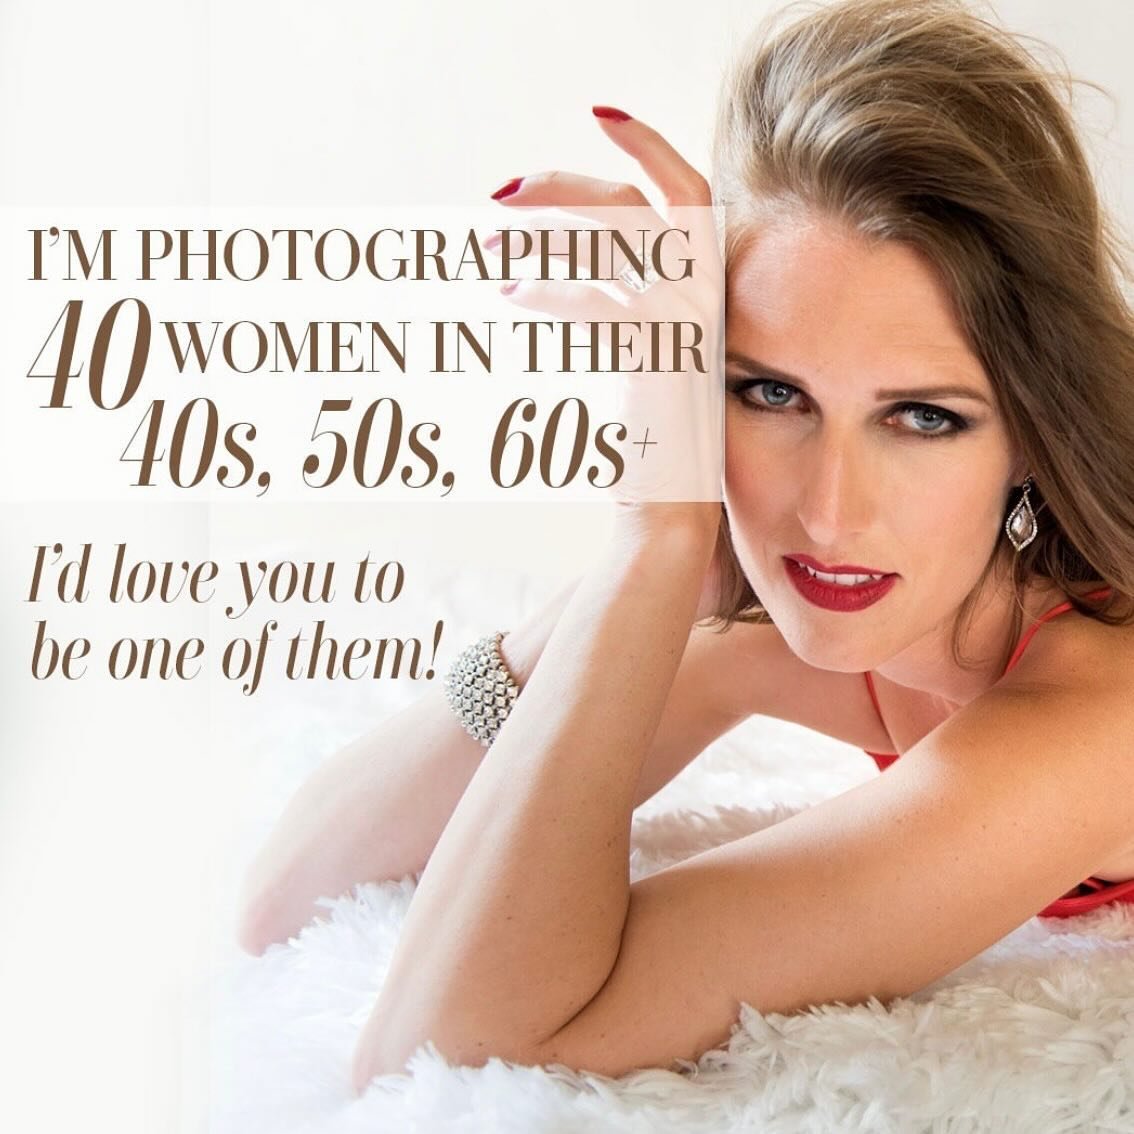 I&rsquo;m inviting 40 women in their 40s, 50s, 60s+ to join me for a one-of-a-kind adventure. Includes professional hair &amp; makeup, a a personal style consultation, and your own luxurious magazine-style photo shoot at my San Rafael studio. 

Feel 